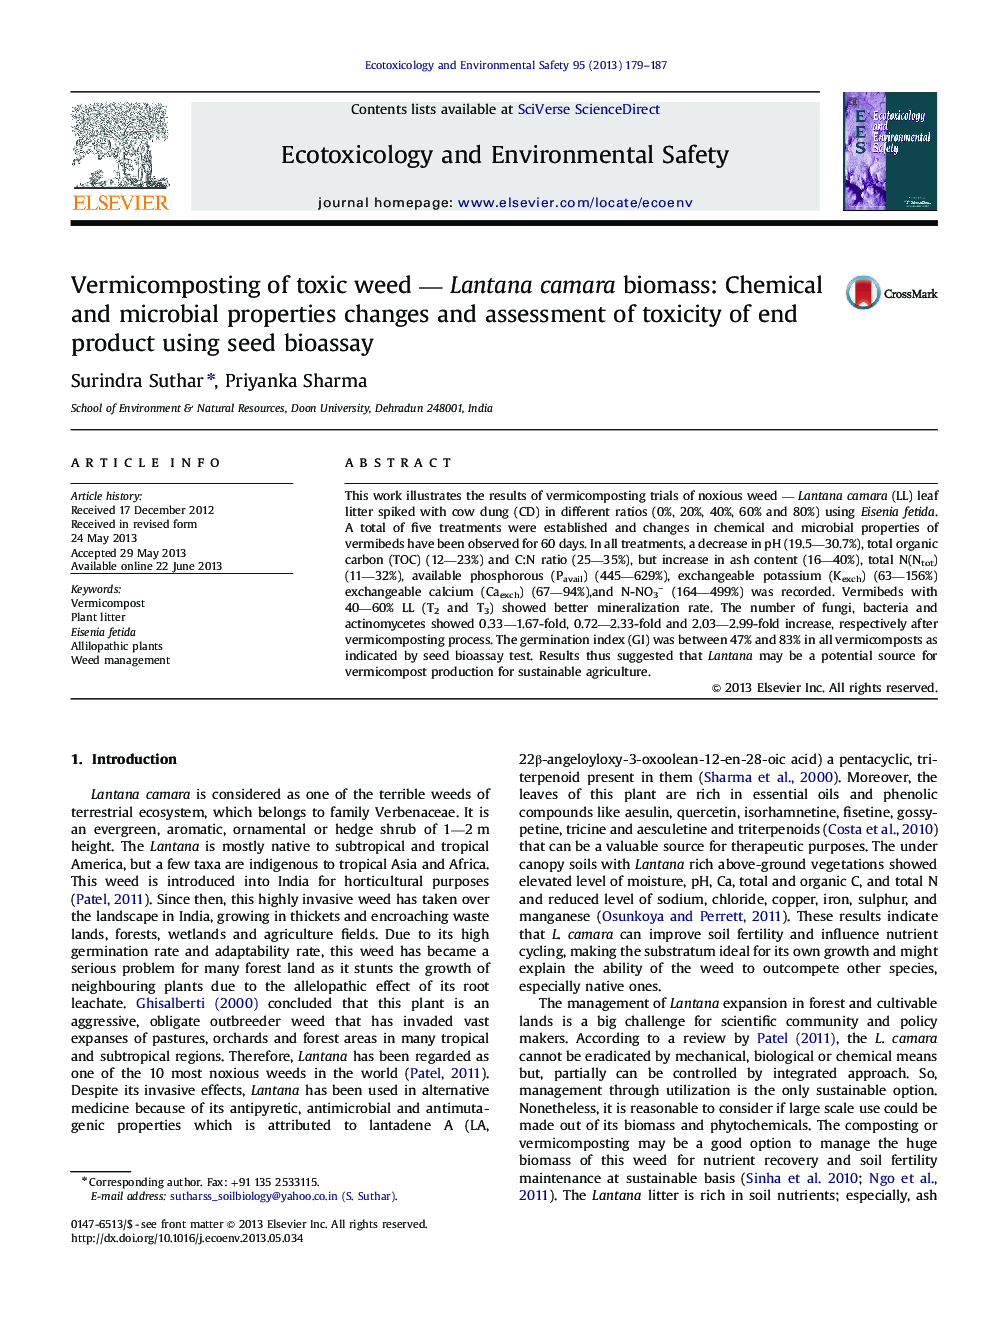 Vermicomposting of toxic weed — Lantana camara biomass: Chemical and microbial properties changes and assessment of toxicity of end product using seed bioassay